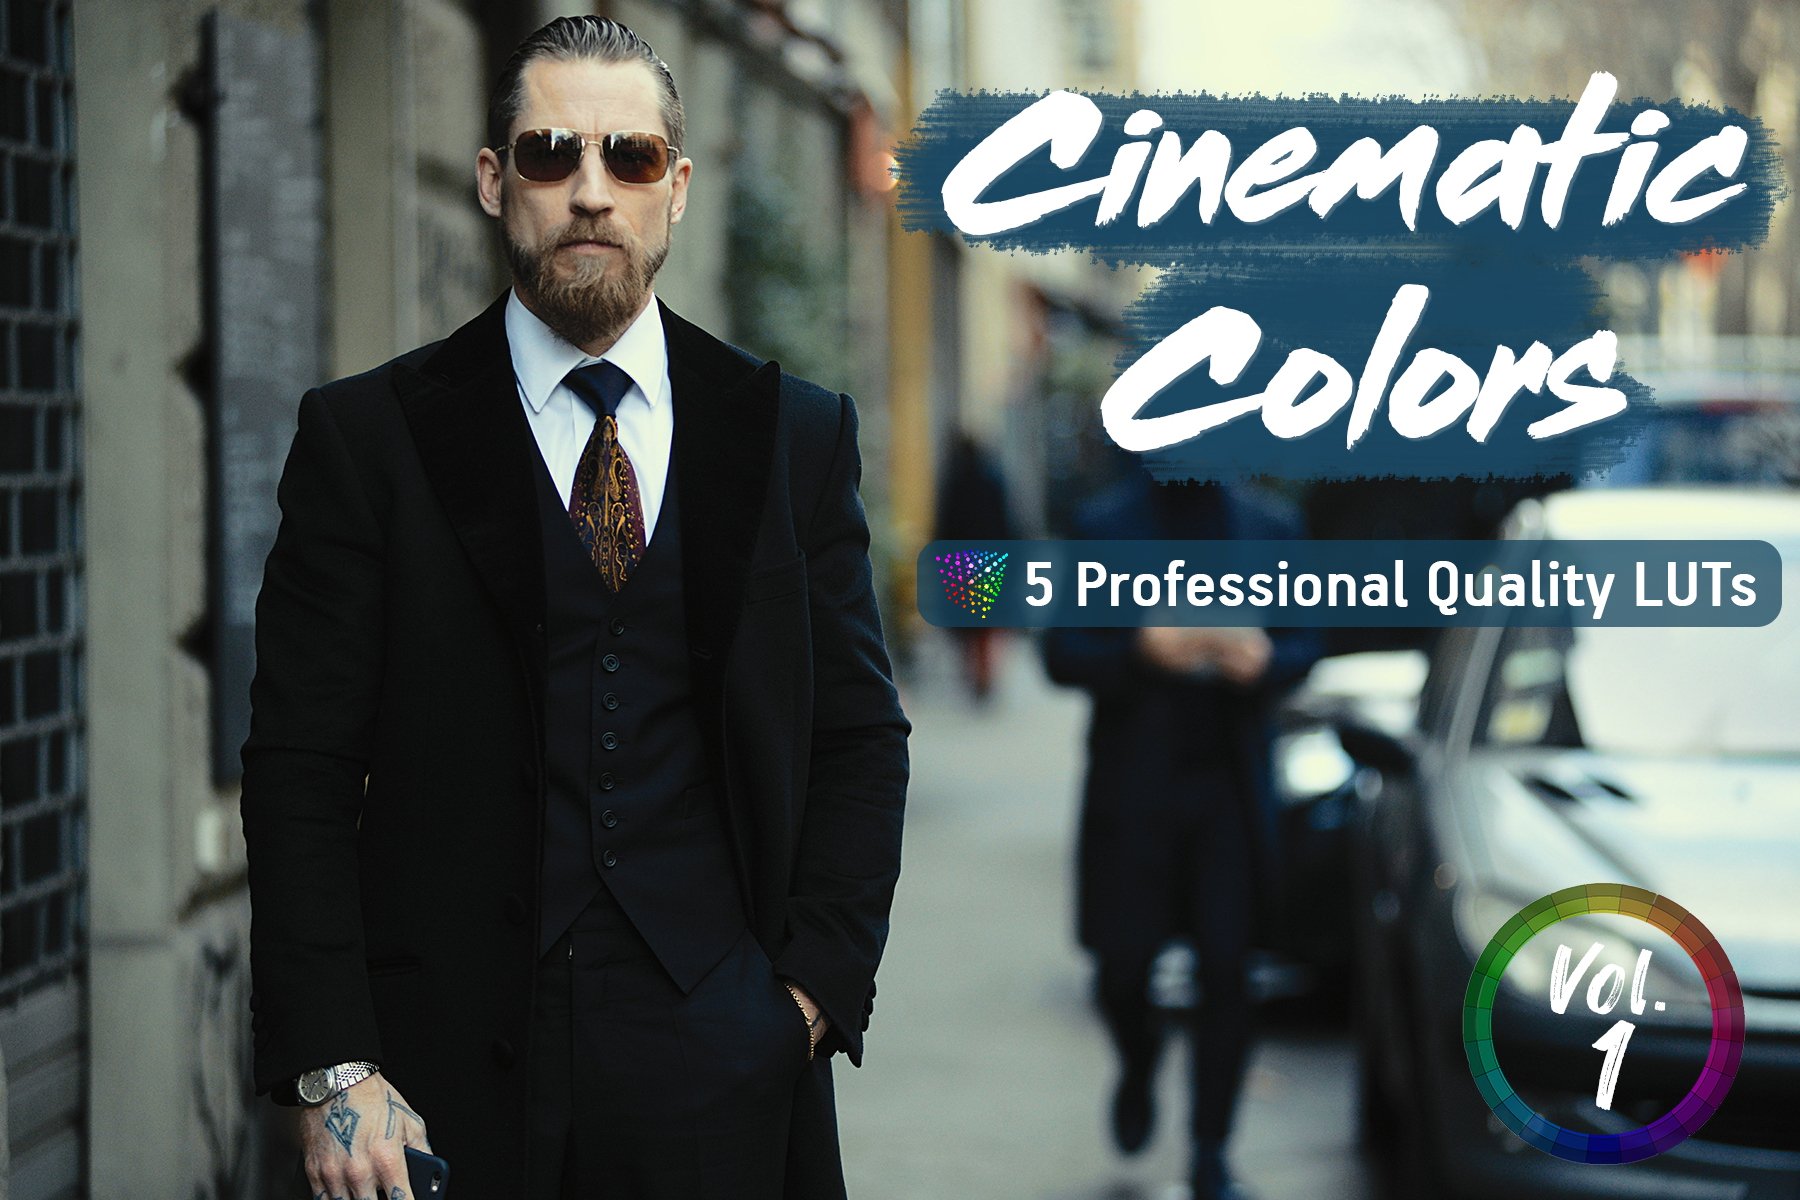 Cinematic Colors Video LUTscover image.